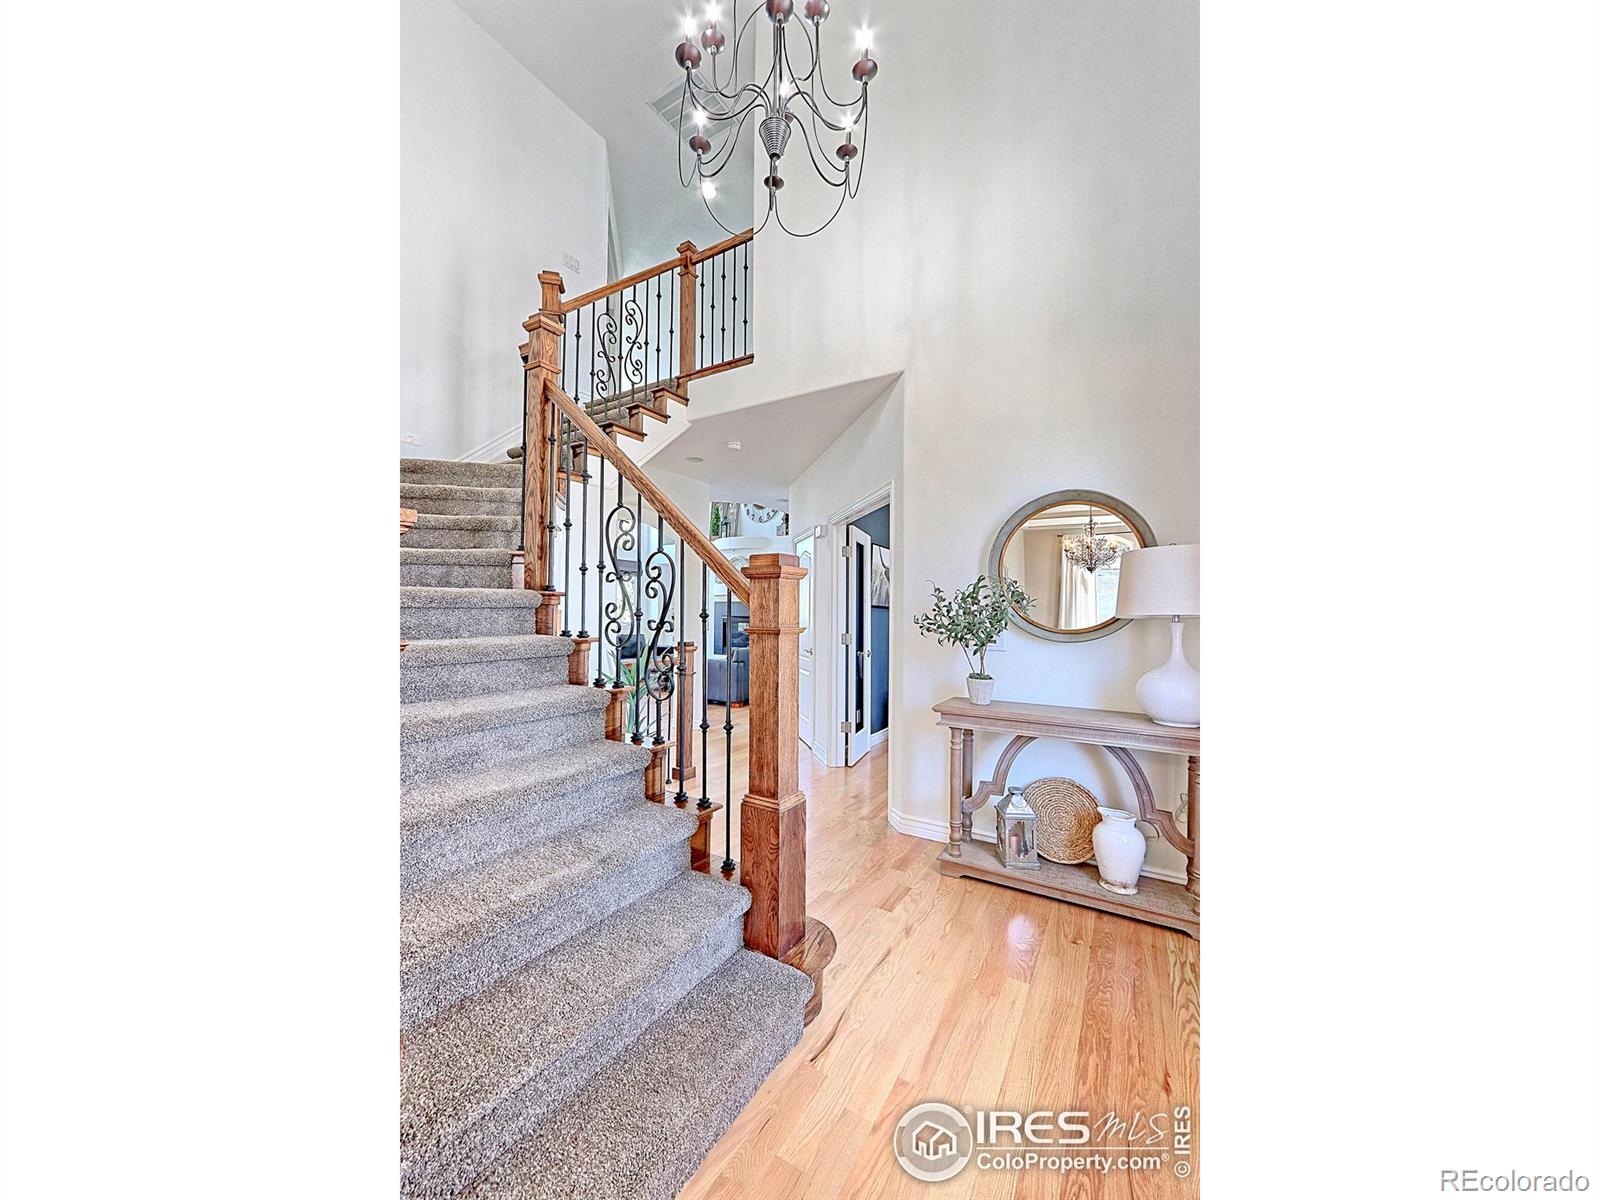 Report Image for 16629 W 69th Circle,Arvada, Colorado